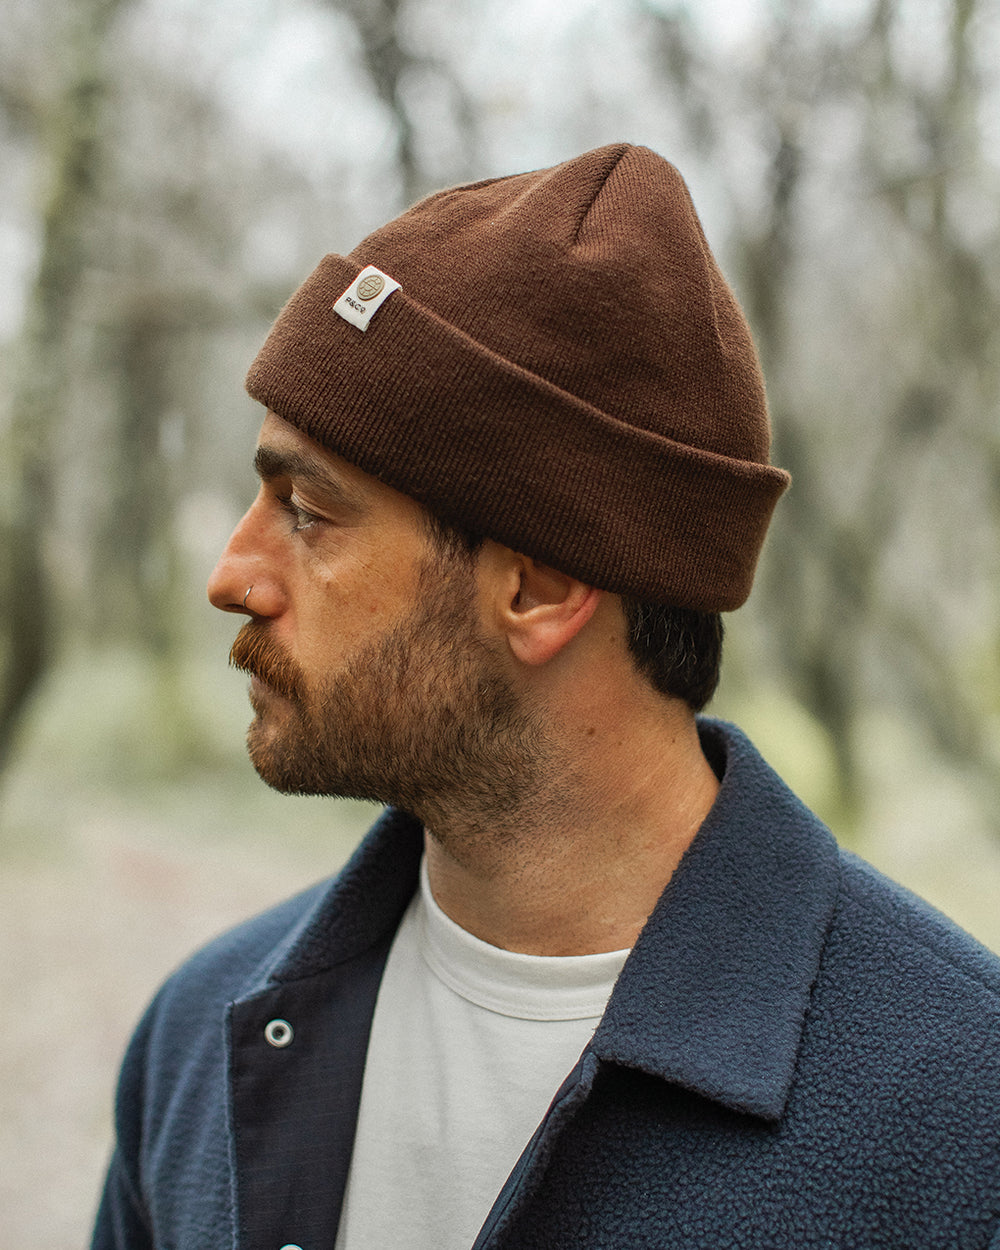 berbo Peacock Feather Fisherman Beanies for Men - Sun-Protection